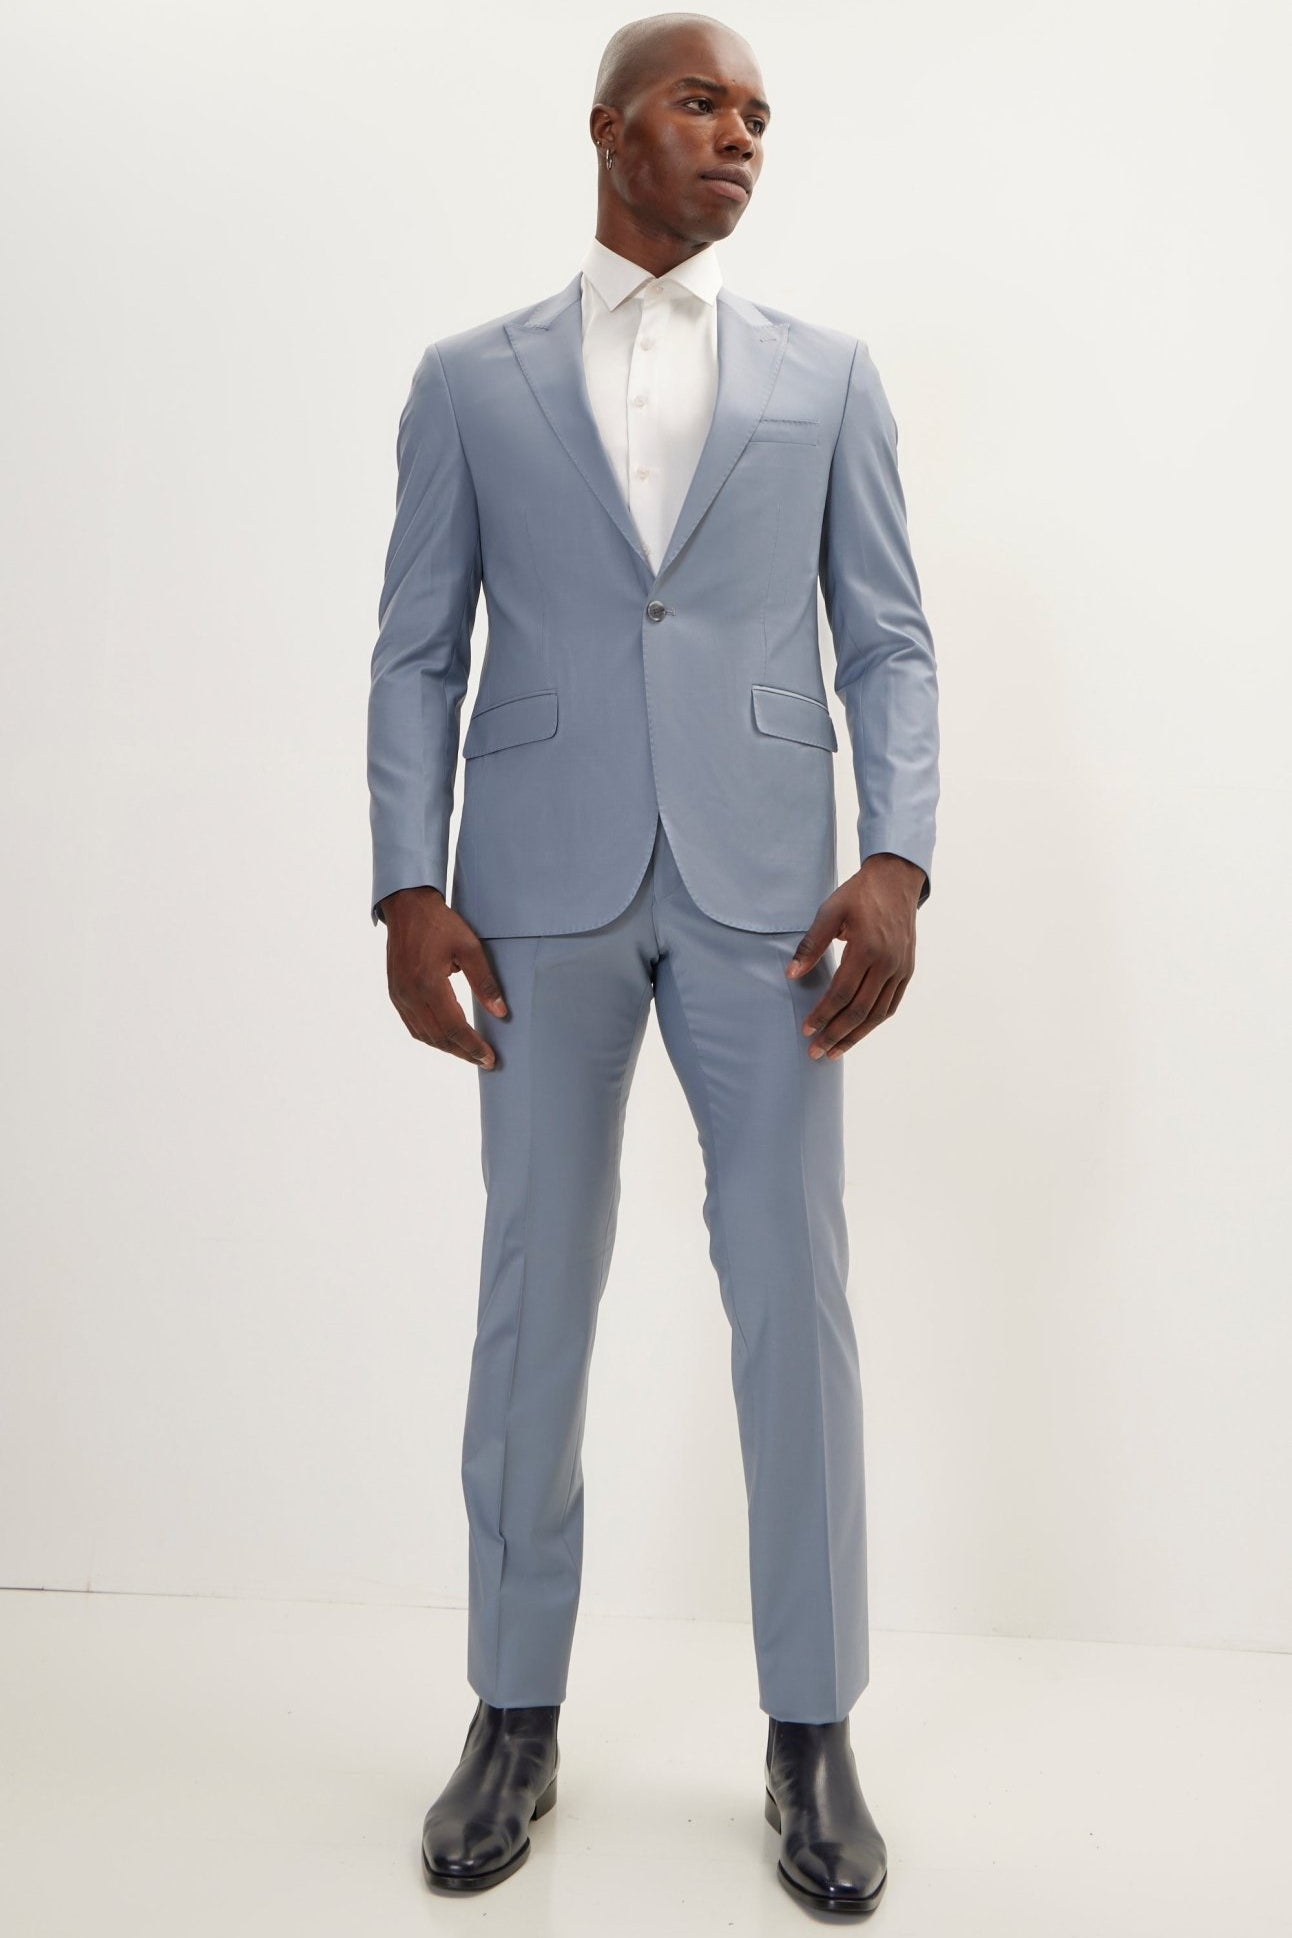 Super 120S Merino Wool Single Breasted Suit - Cool Grey - Ron Tomson